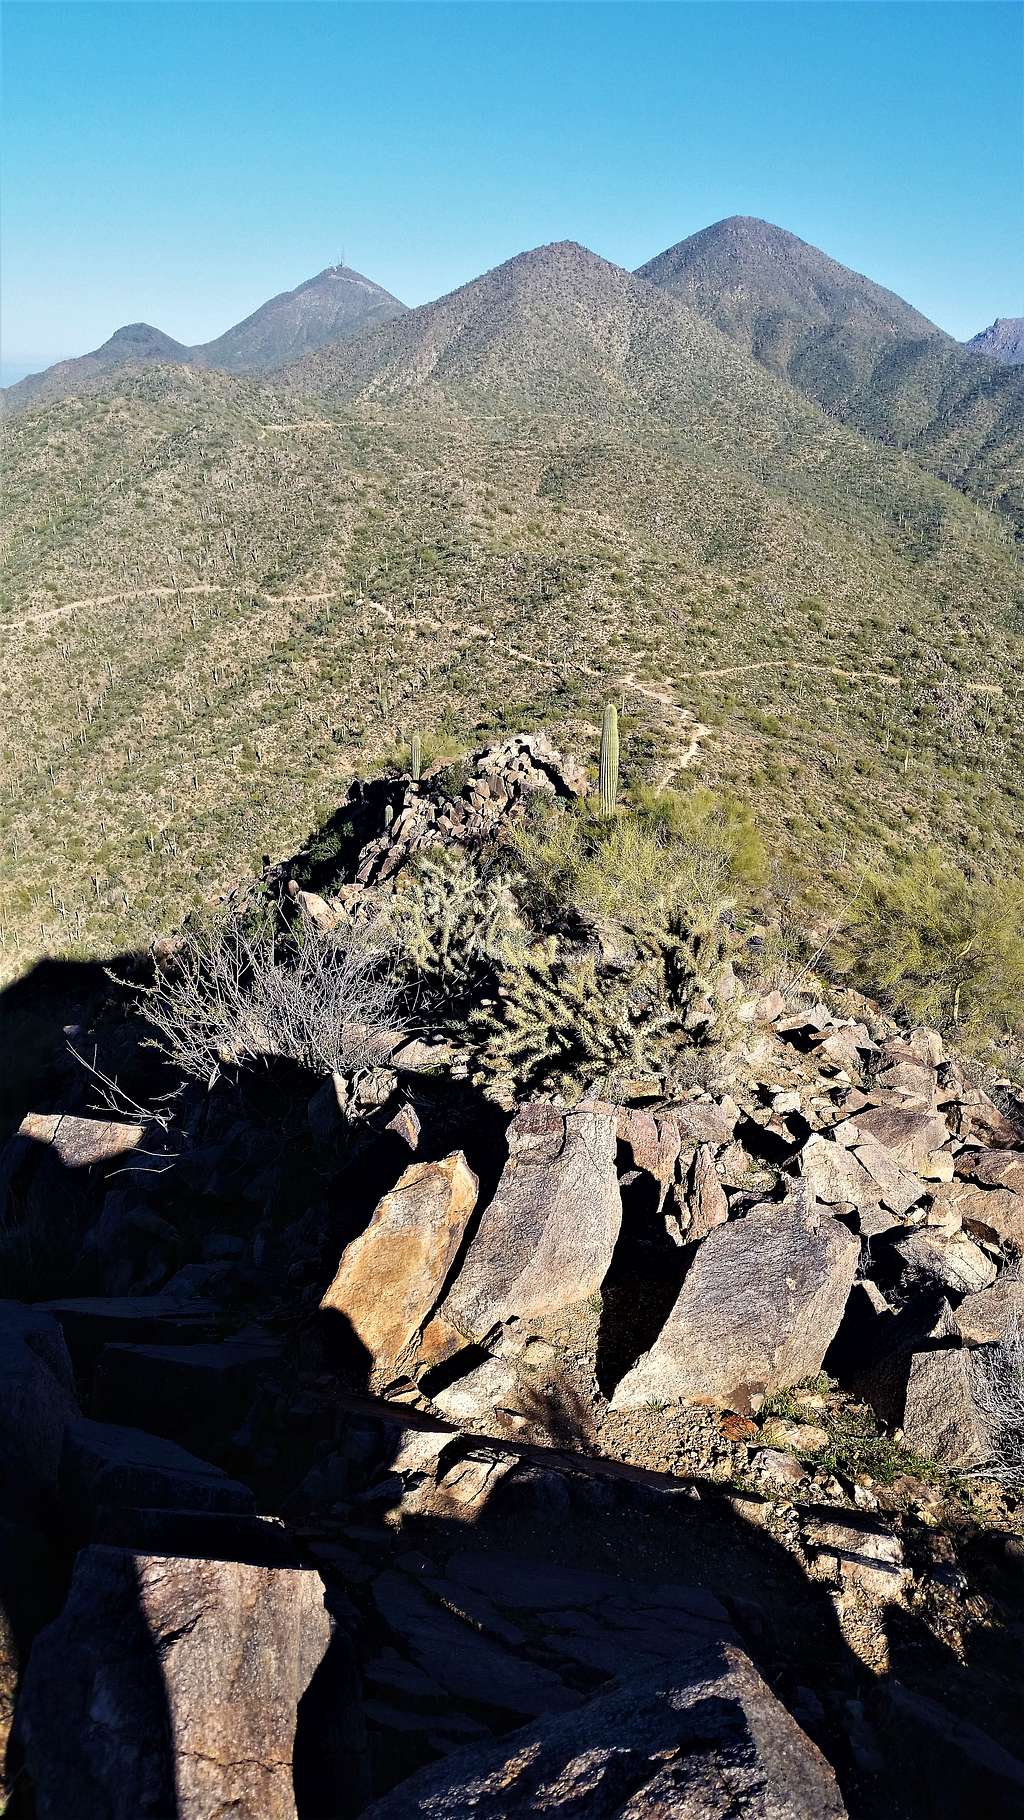 View from the summit to the higher peaks of the McDowell Range